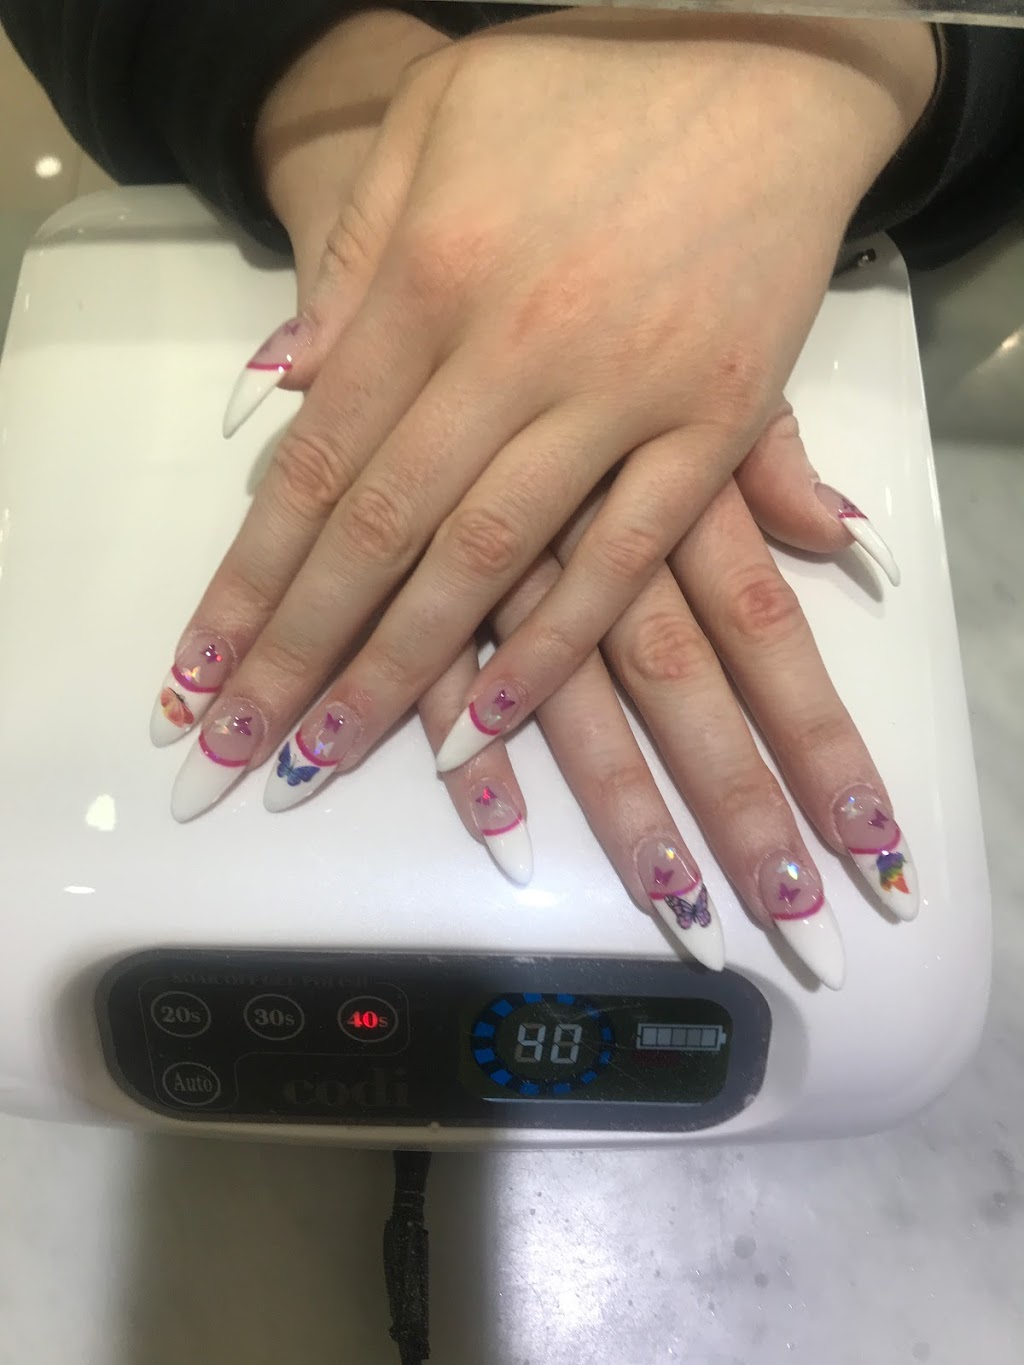 Sumgirl nails&Spa | 253 West St, Seymour, CT 06483 | Phone: (475) 675-5436